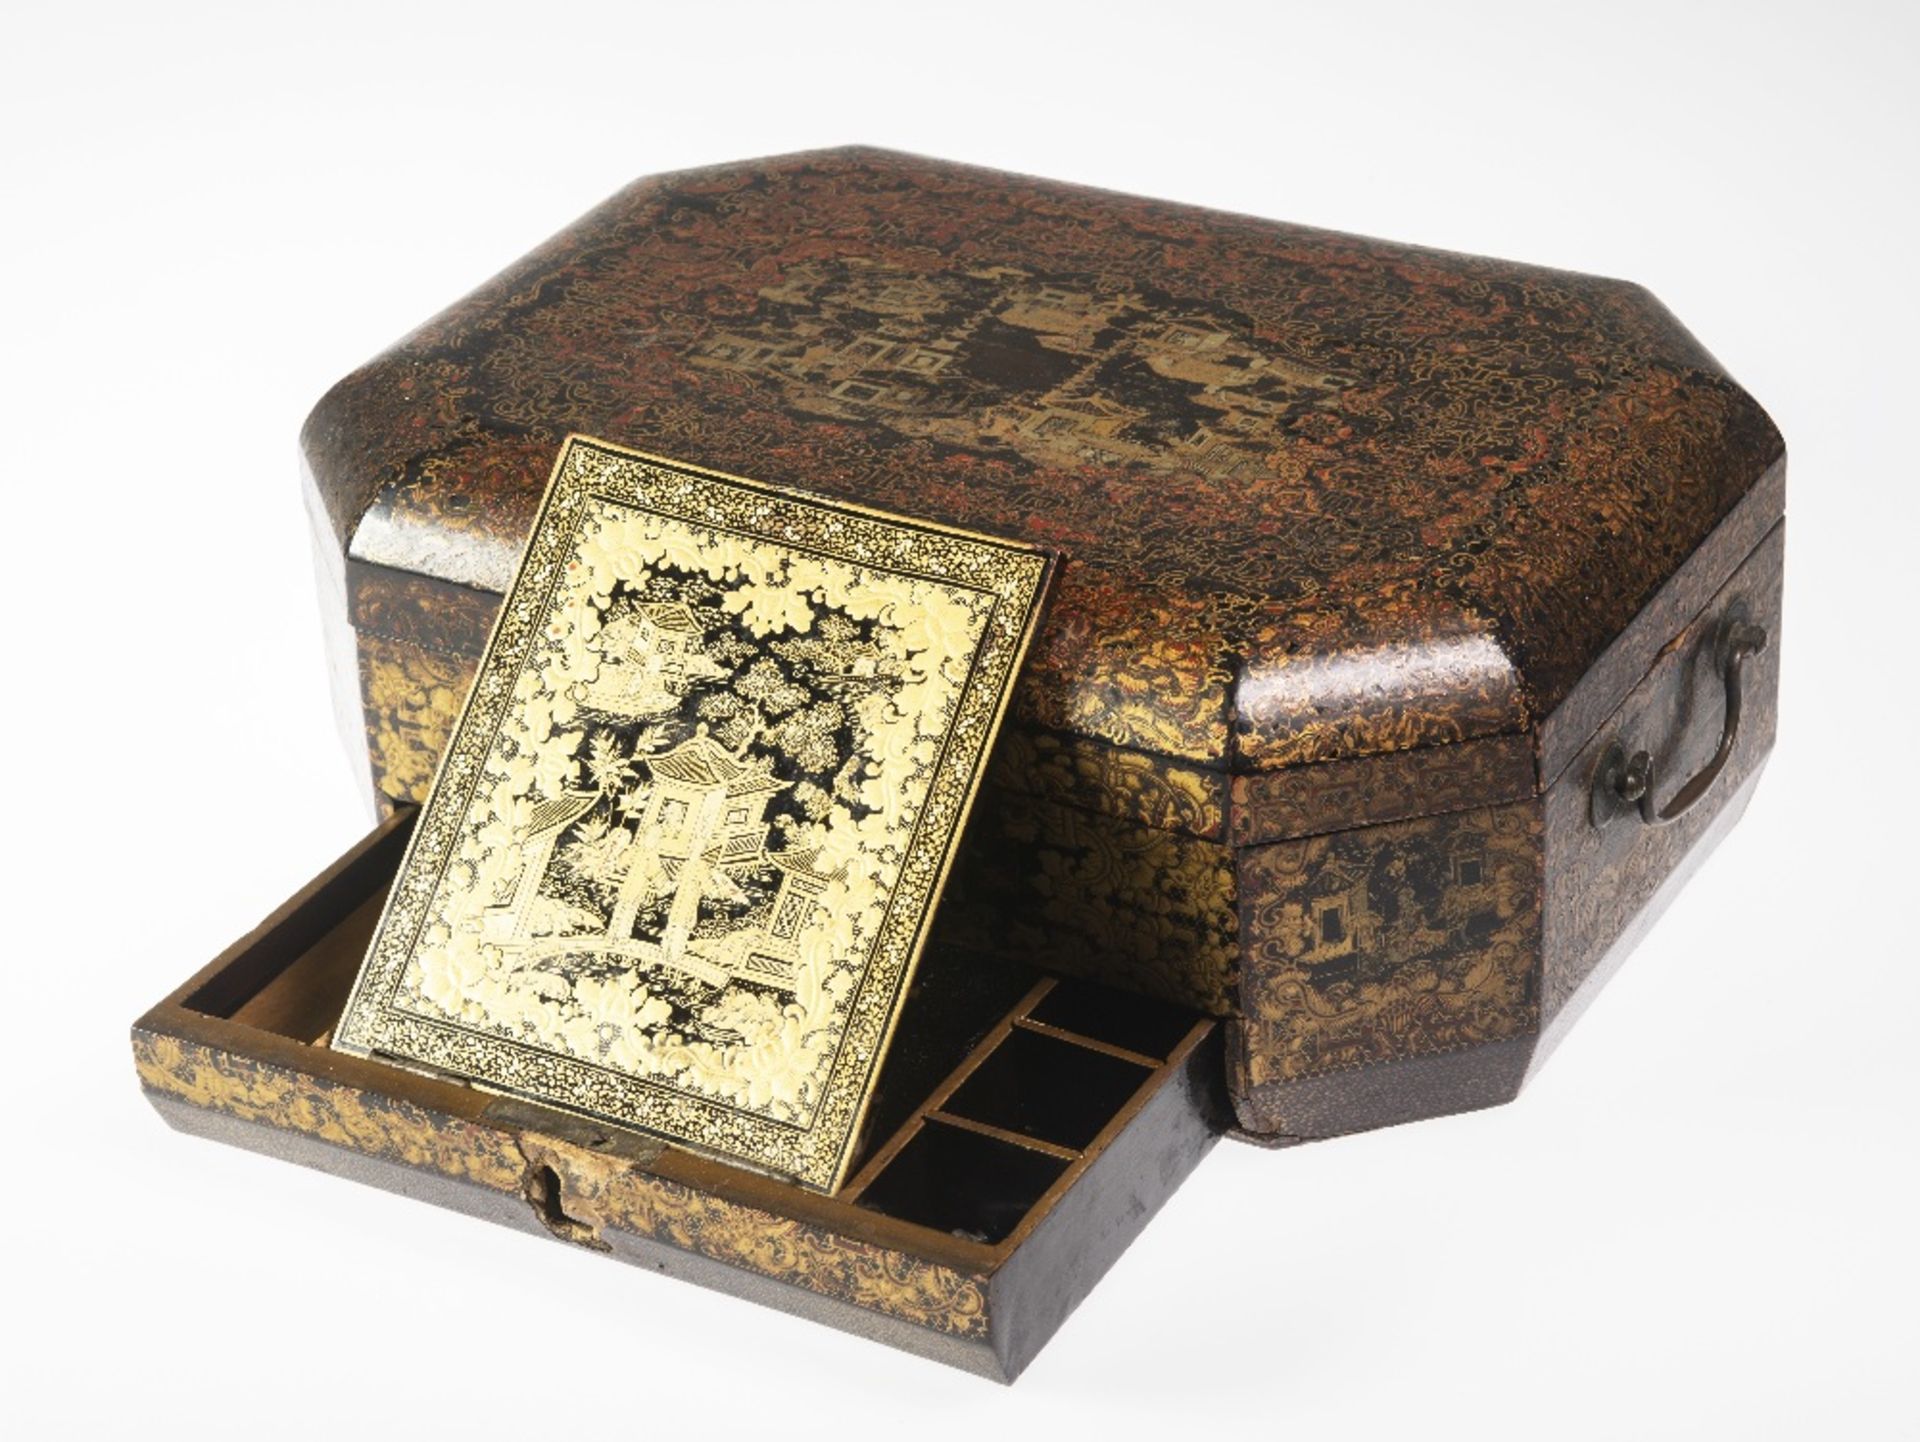 AN EARLY 19TH CENTURY CHINESE EXPORT LACQUER WORK BOX